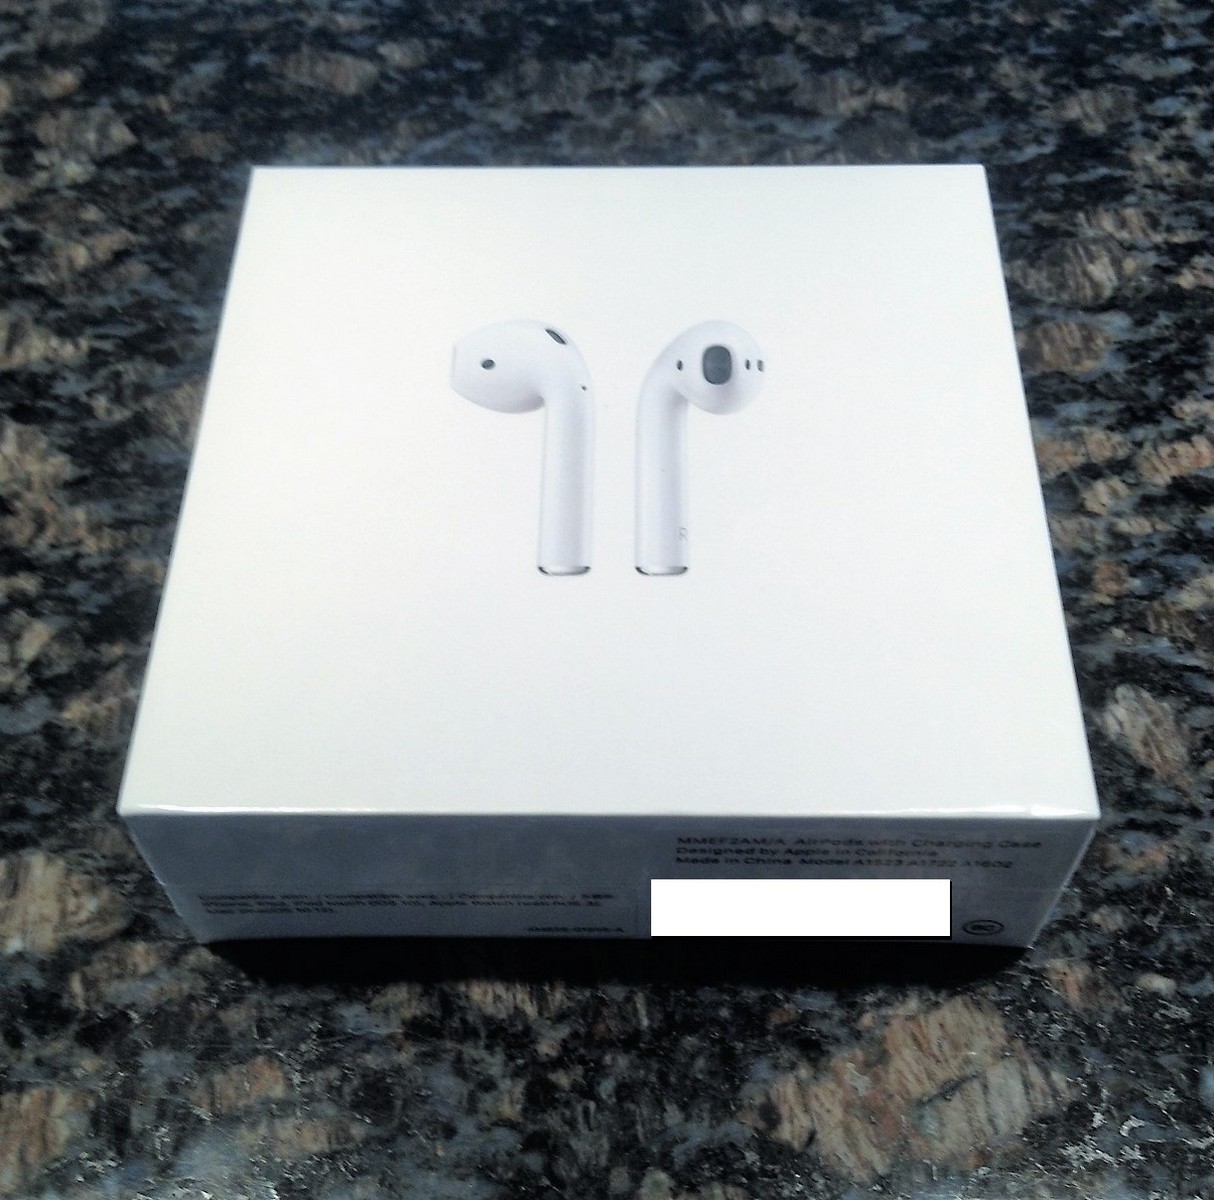 Reselling Apple AirPods